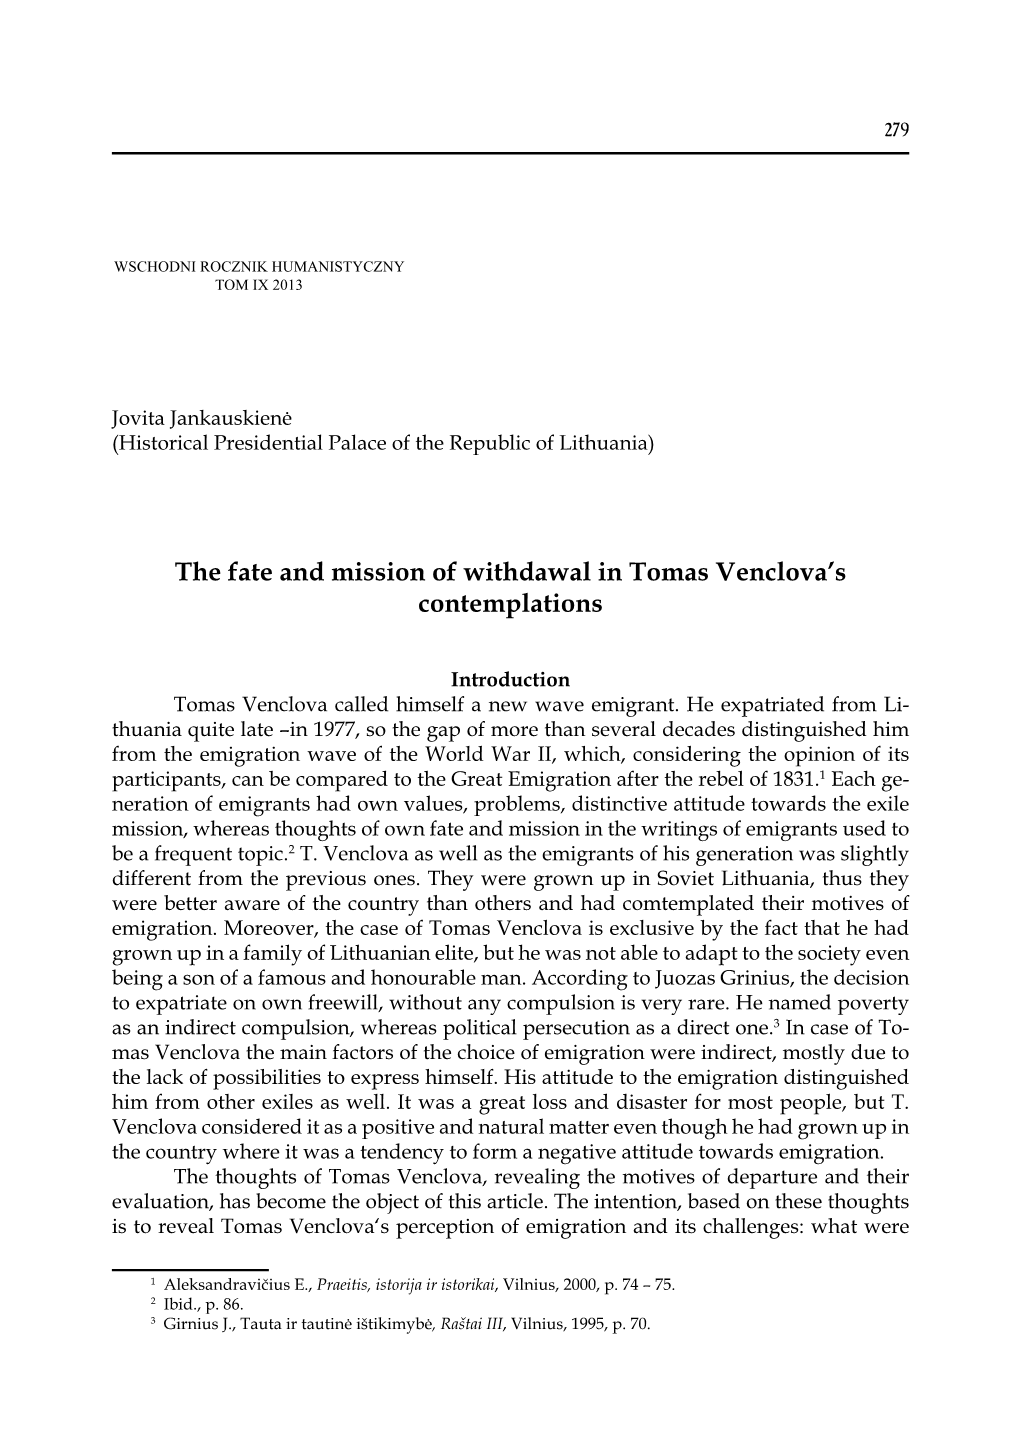 The Fate and Mission of Withdawal in Tomas Venclova's Contemplations